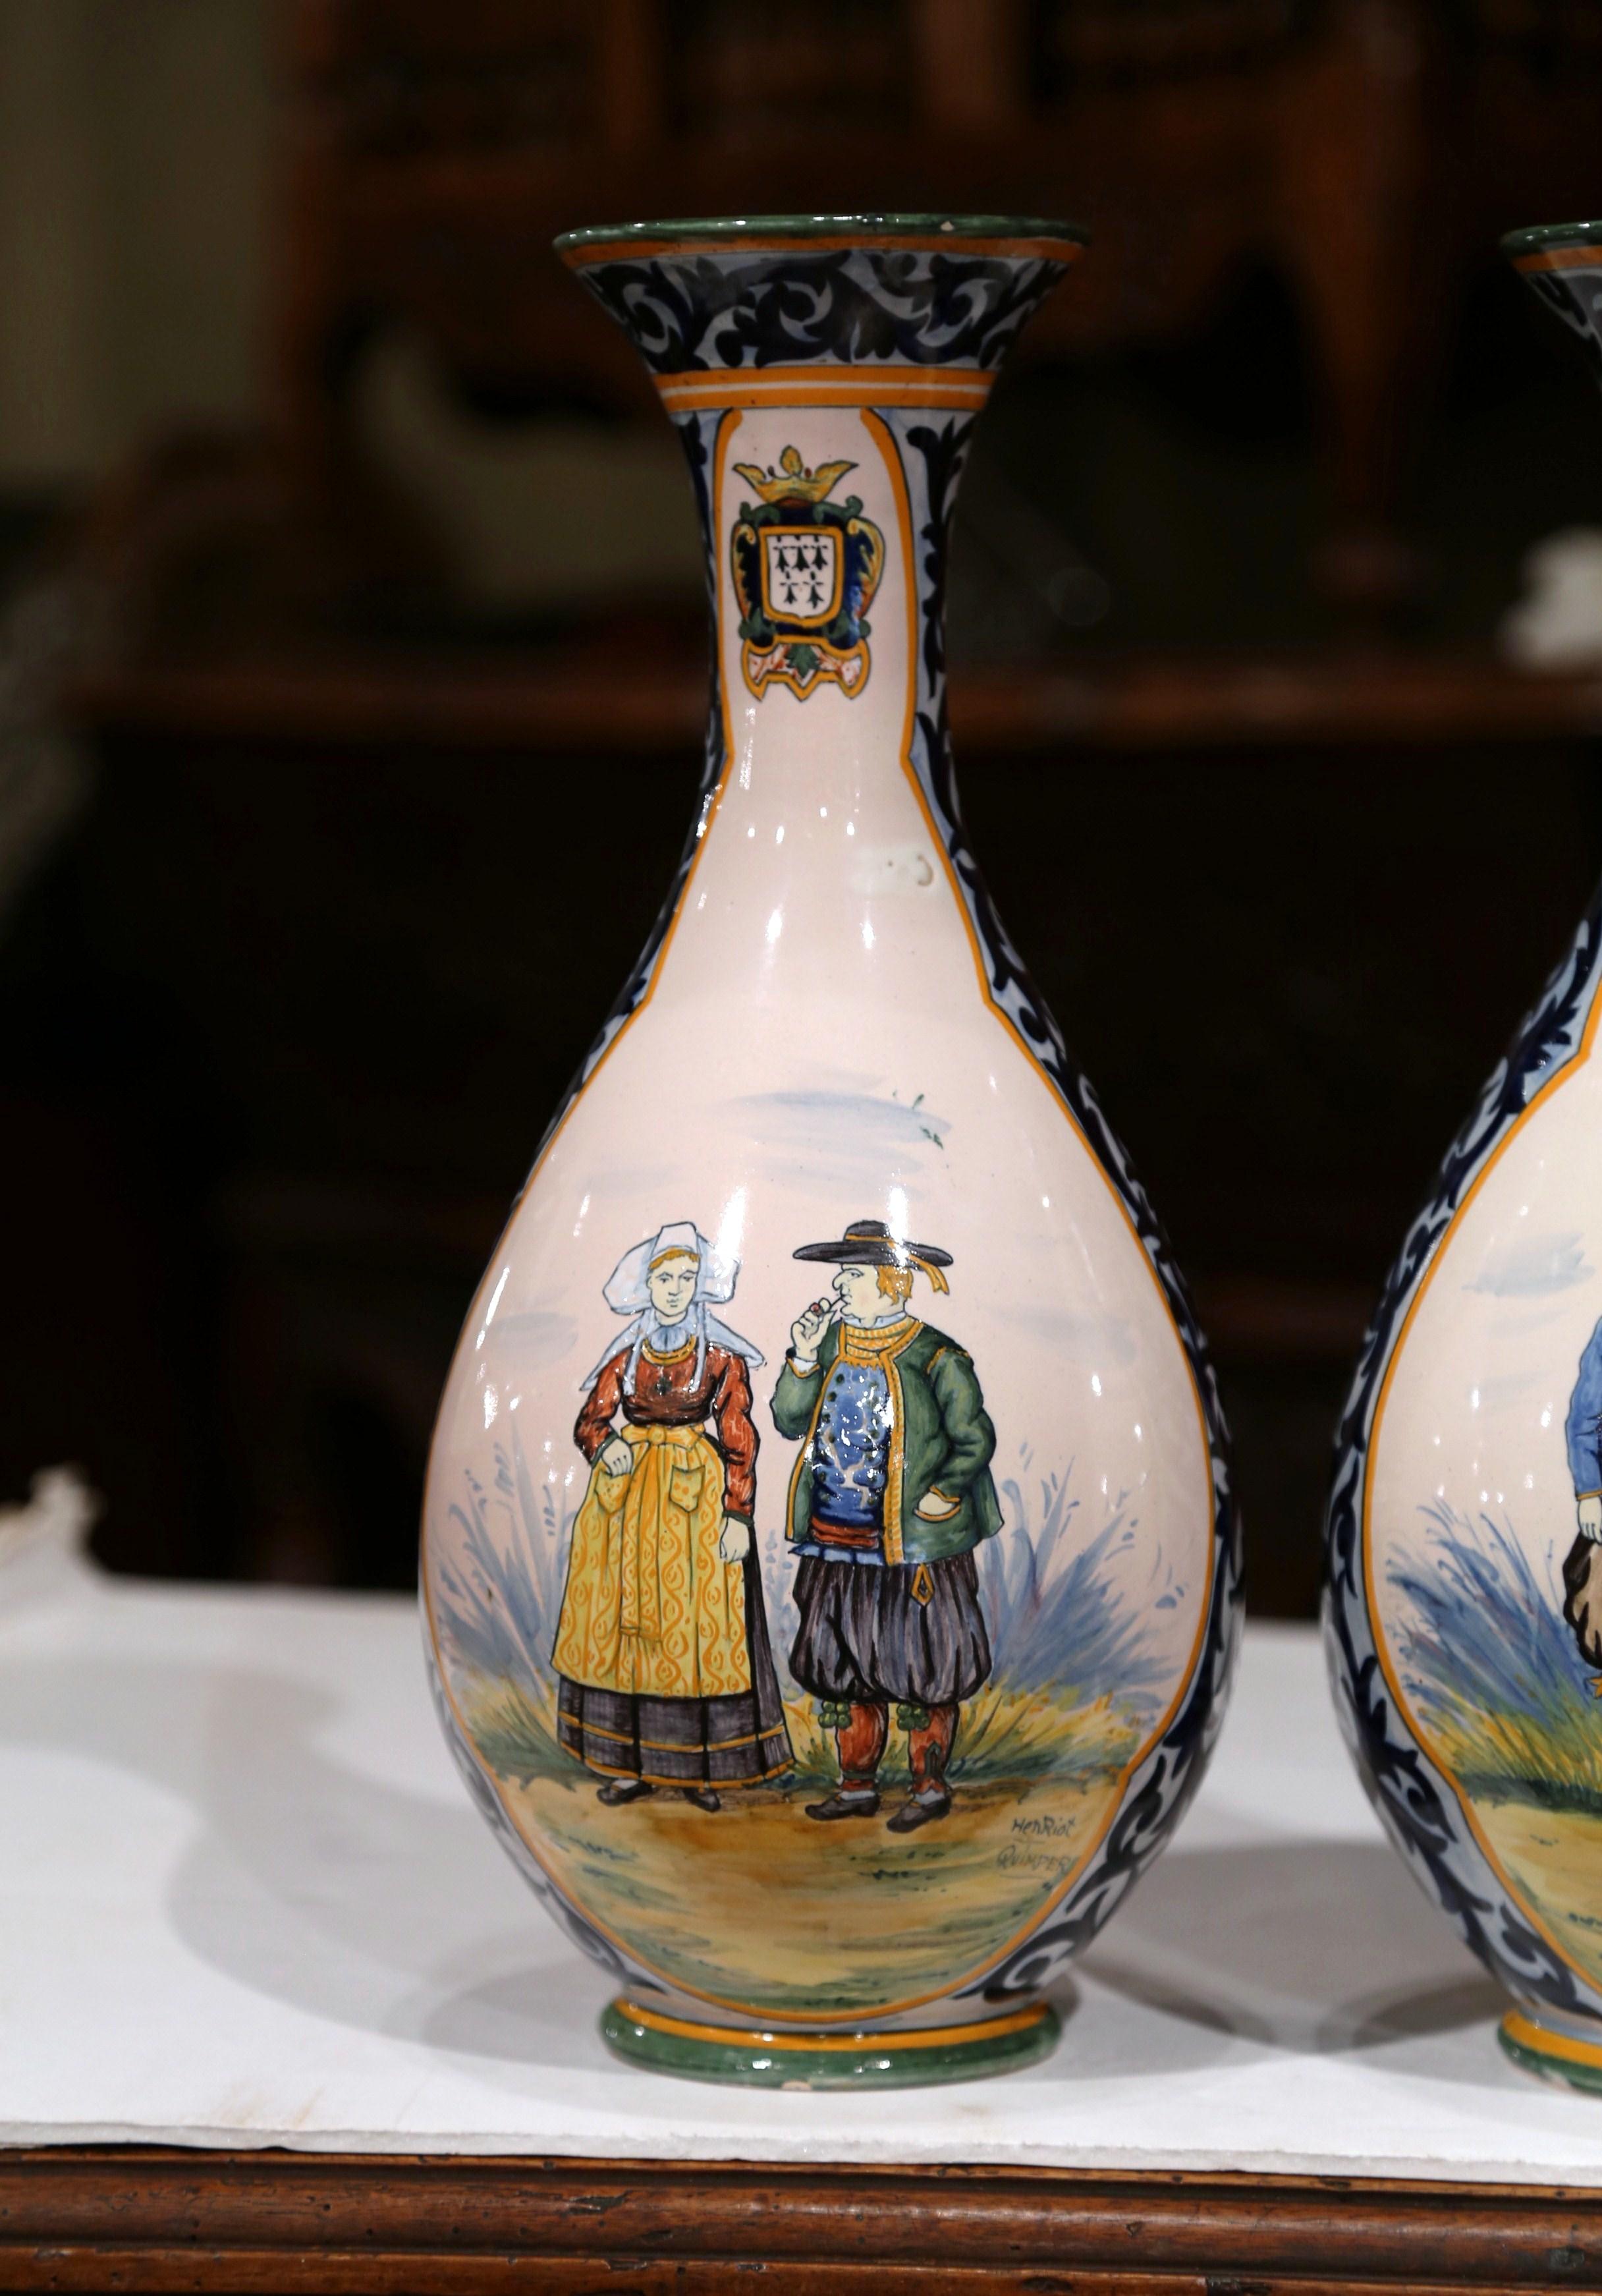 Complete your faience collection with this colorful pair of antique vases from Brittany. Crafted in Quimper, France, circa 1880, both jars are round in shape, and are hand painted with Britons people dressed in traditional outfits and embellished